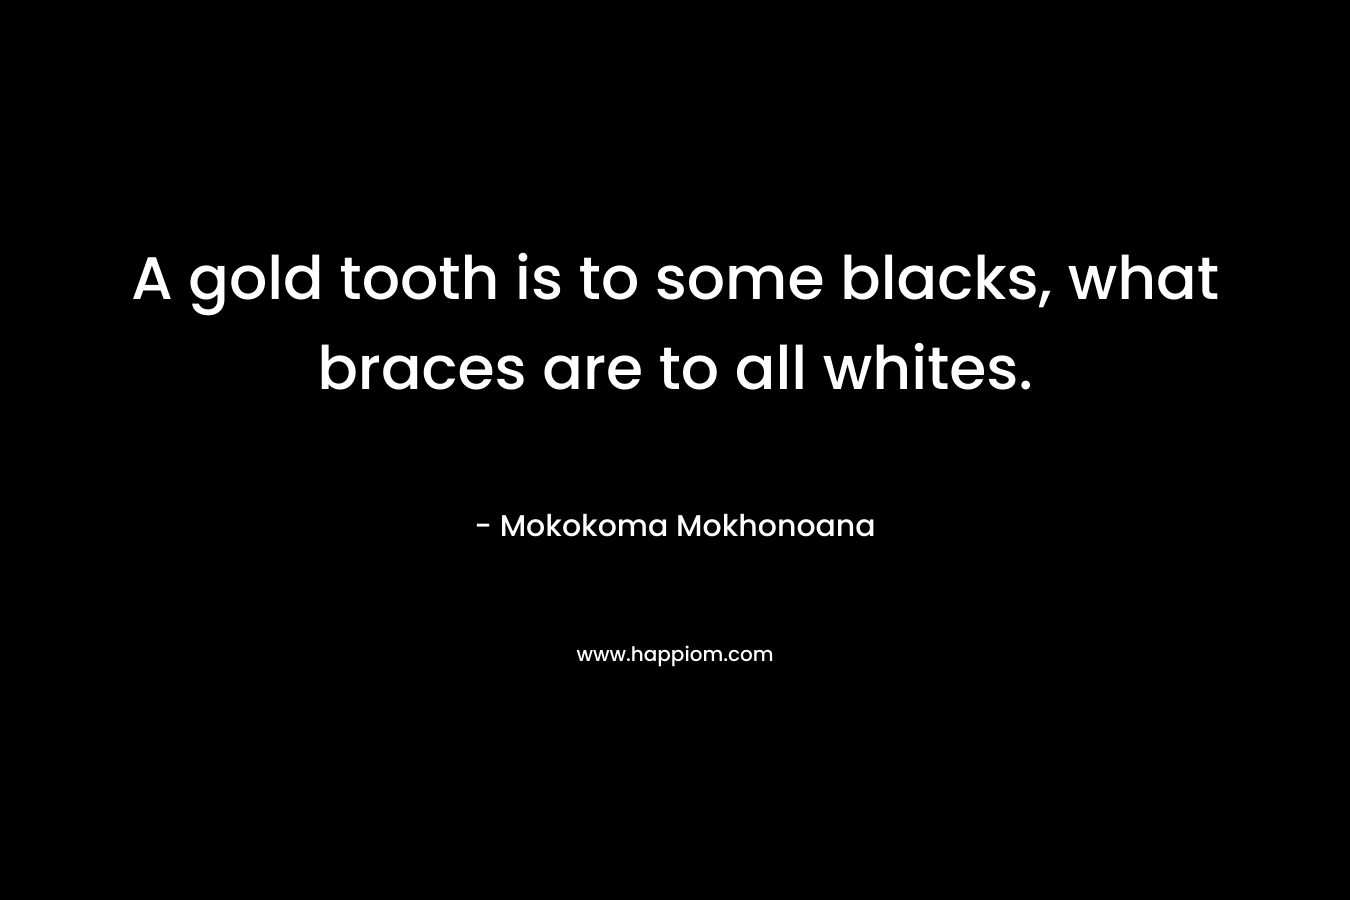 A gold tooth is to some blacks, what braces are to all whites.